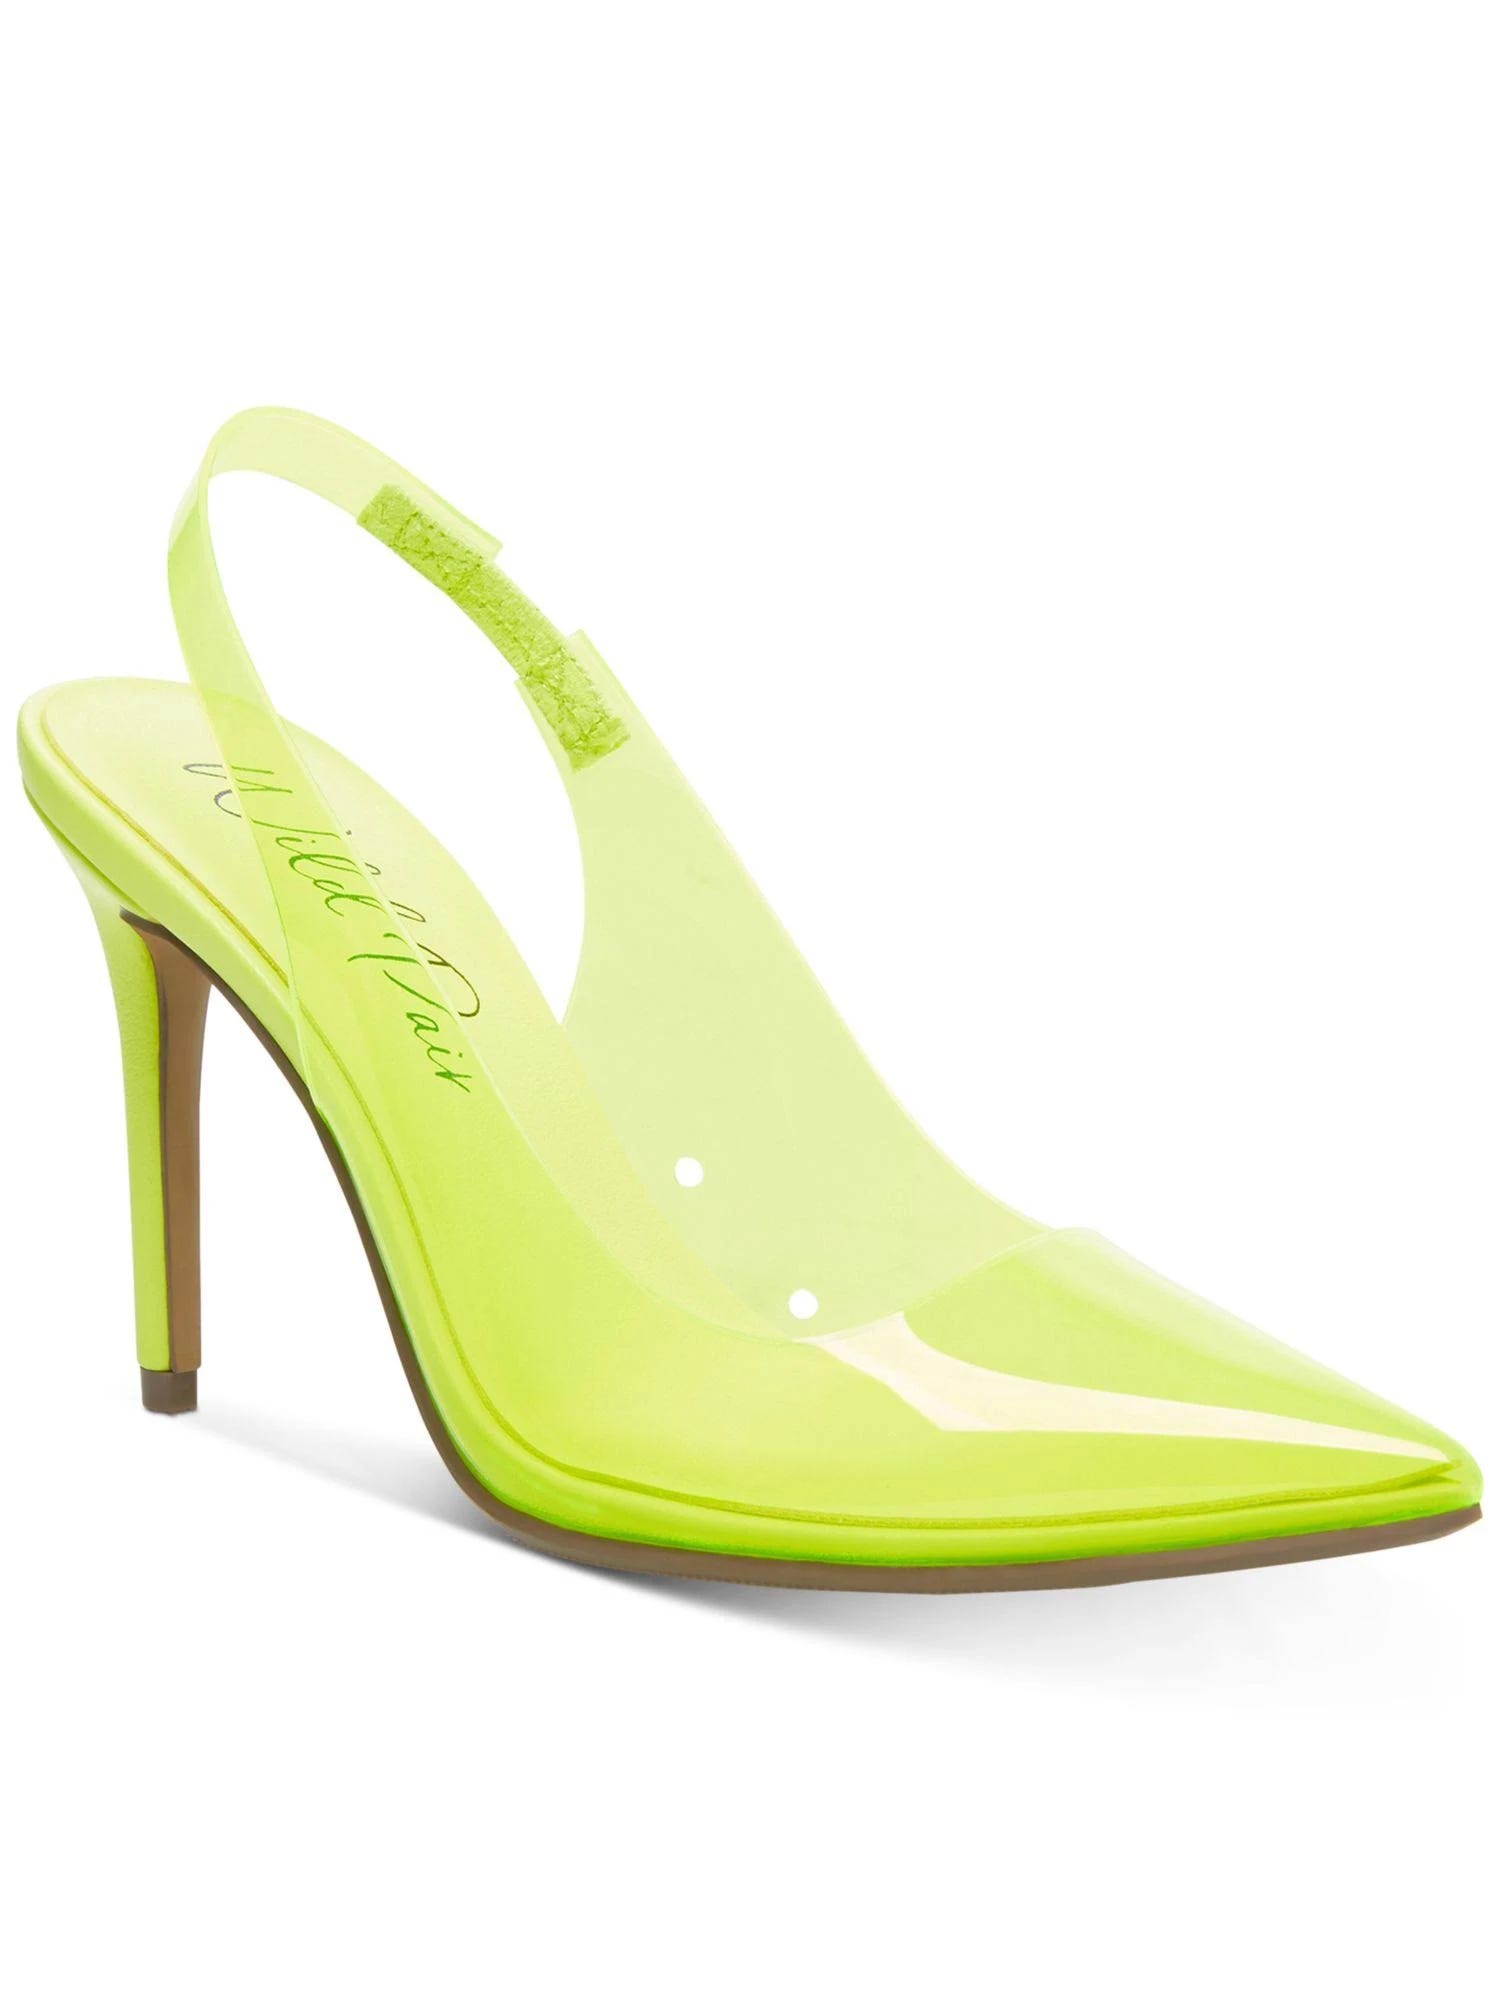 Vibrant Lime Stiletto Pumps from Wild Pair for Dressy Occasions | Image